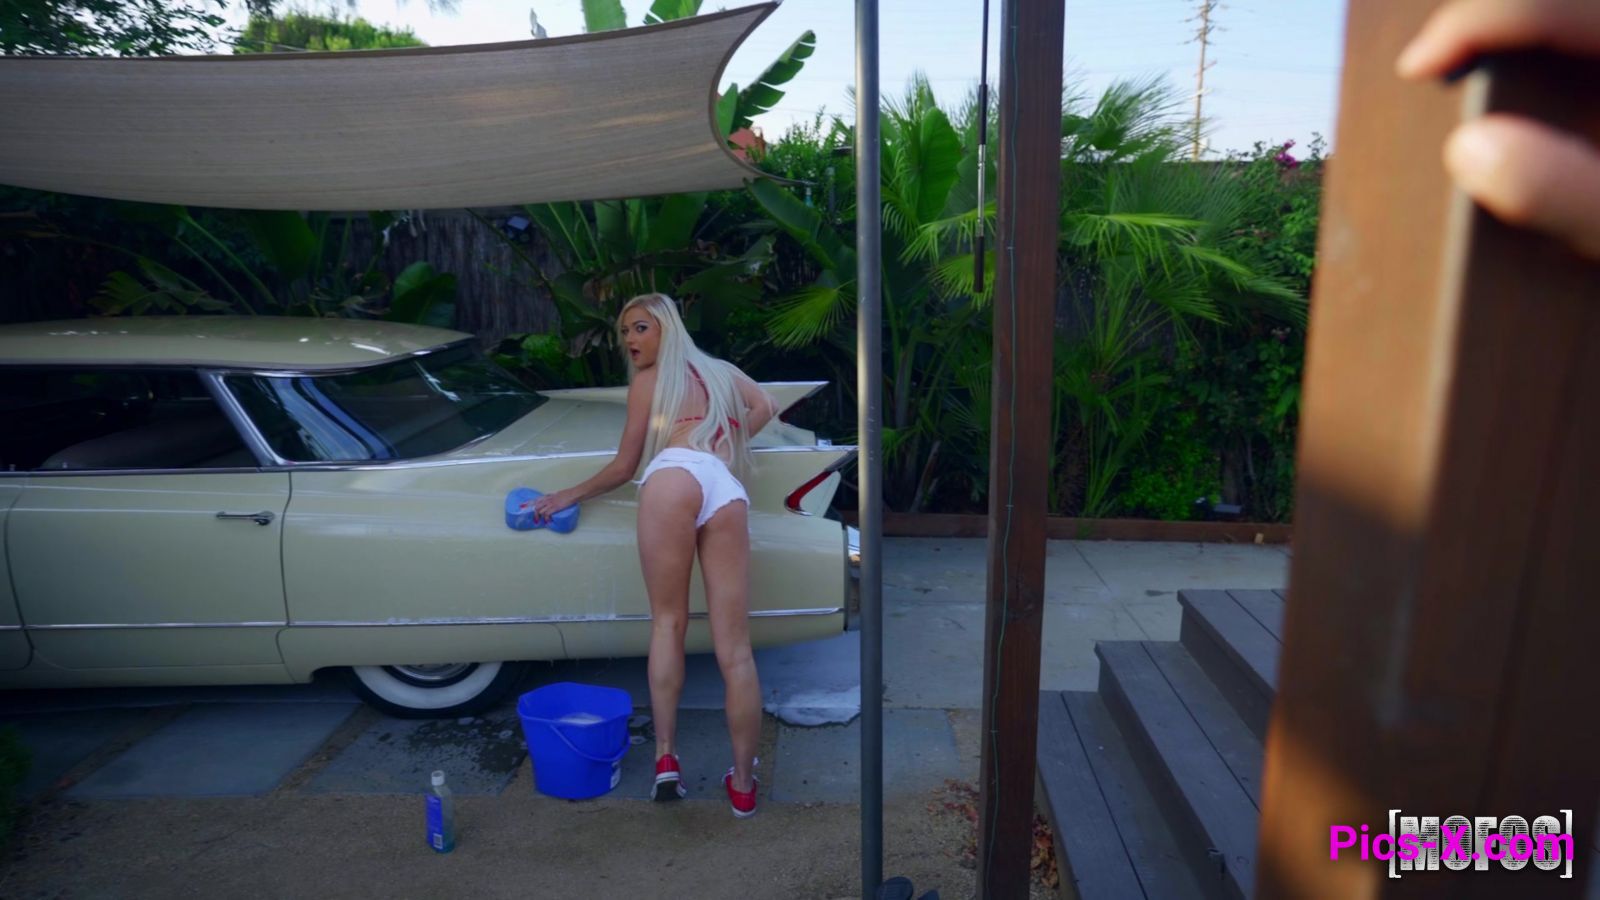 Wash My Car - I Know That Girl - Image 10